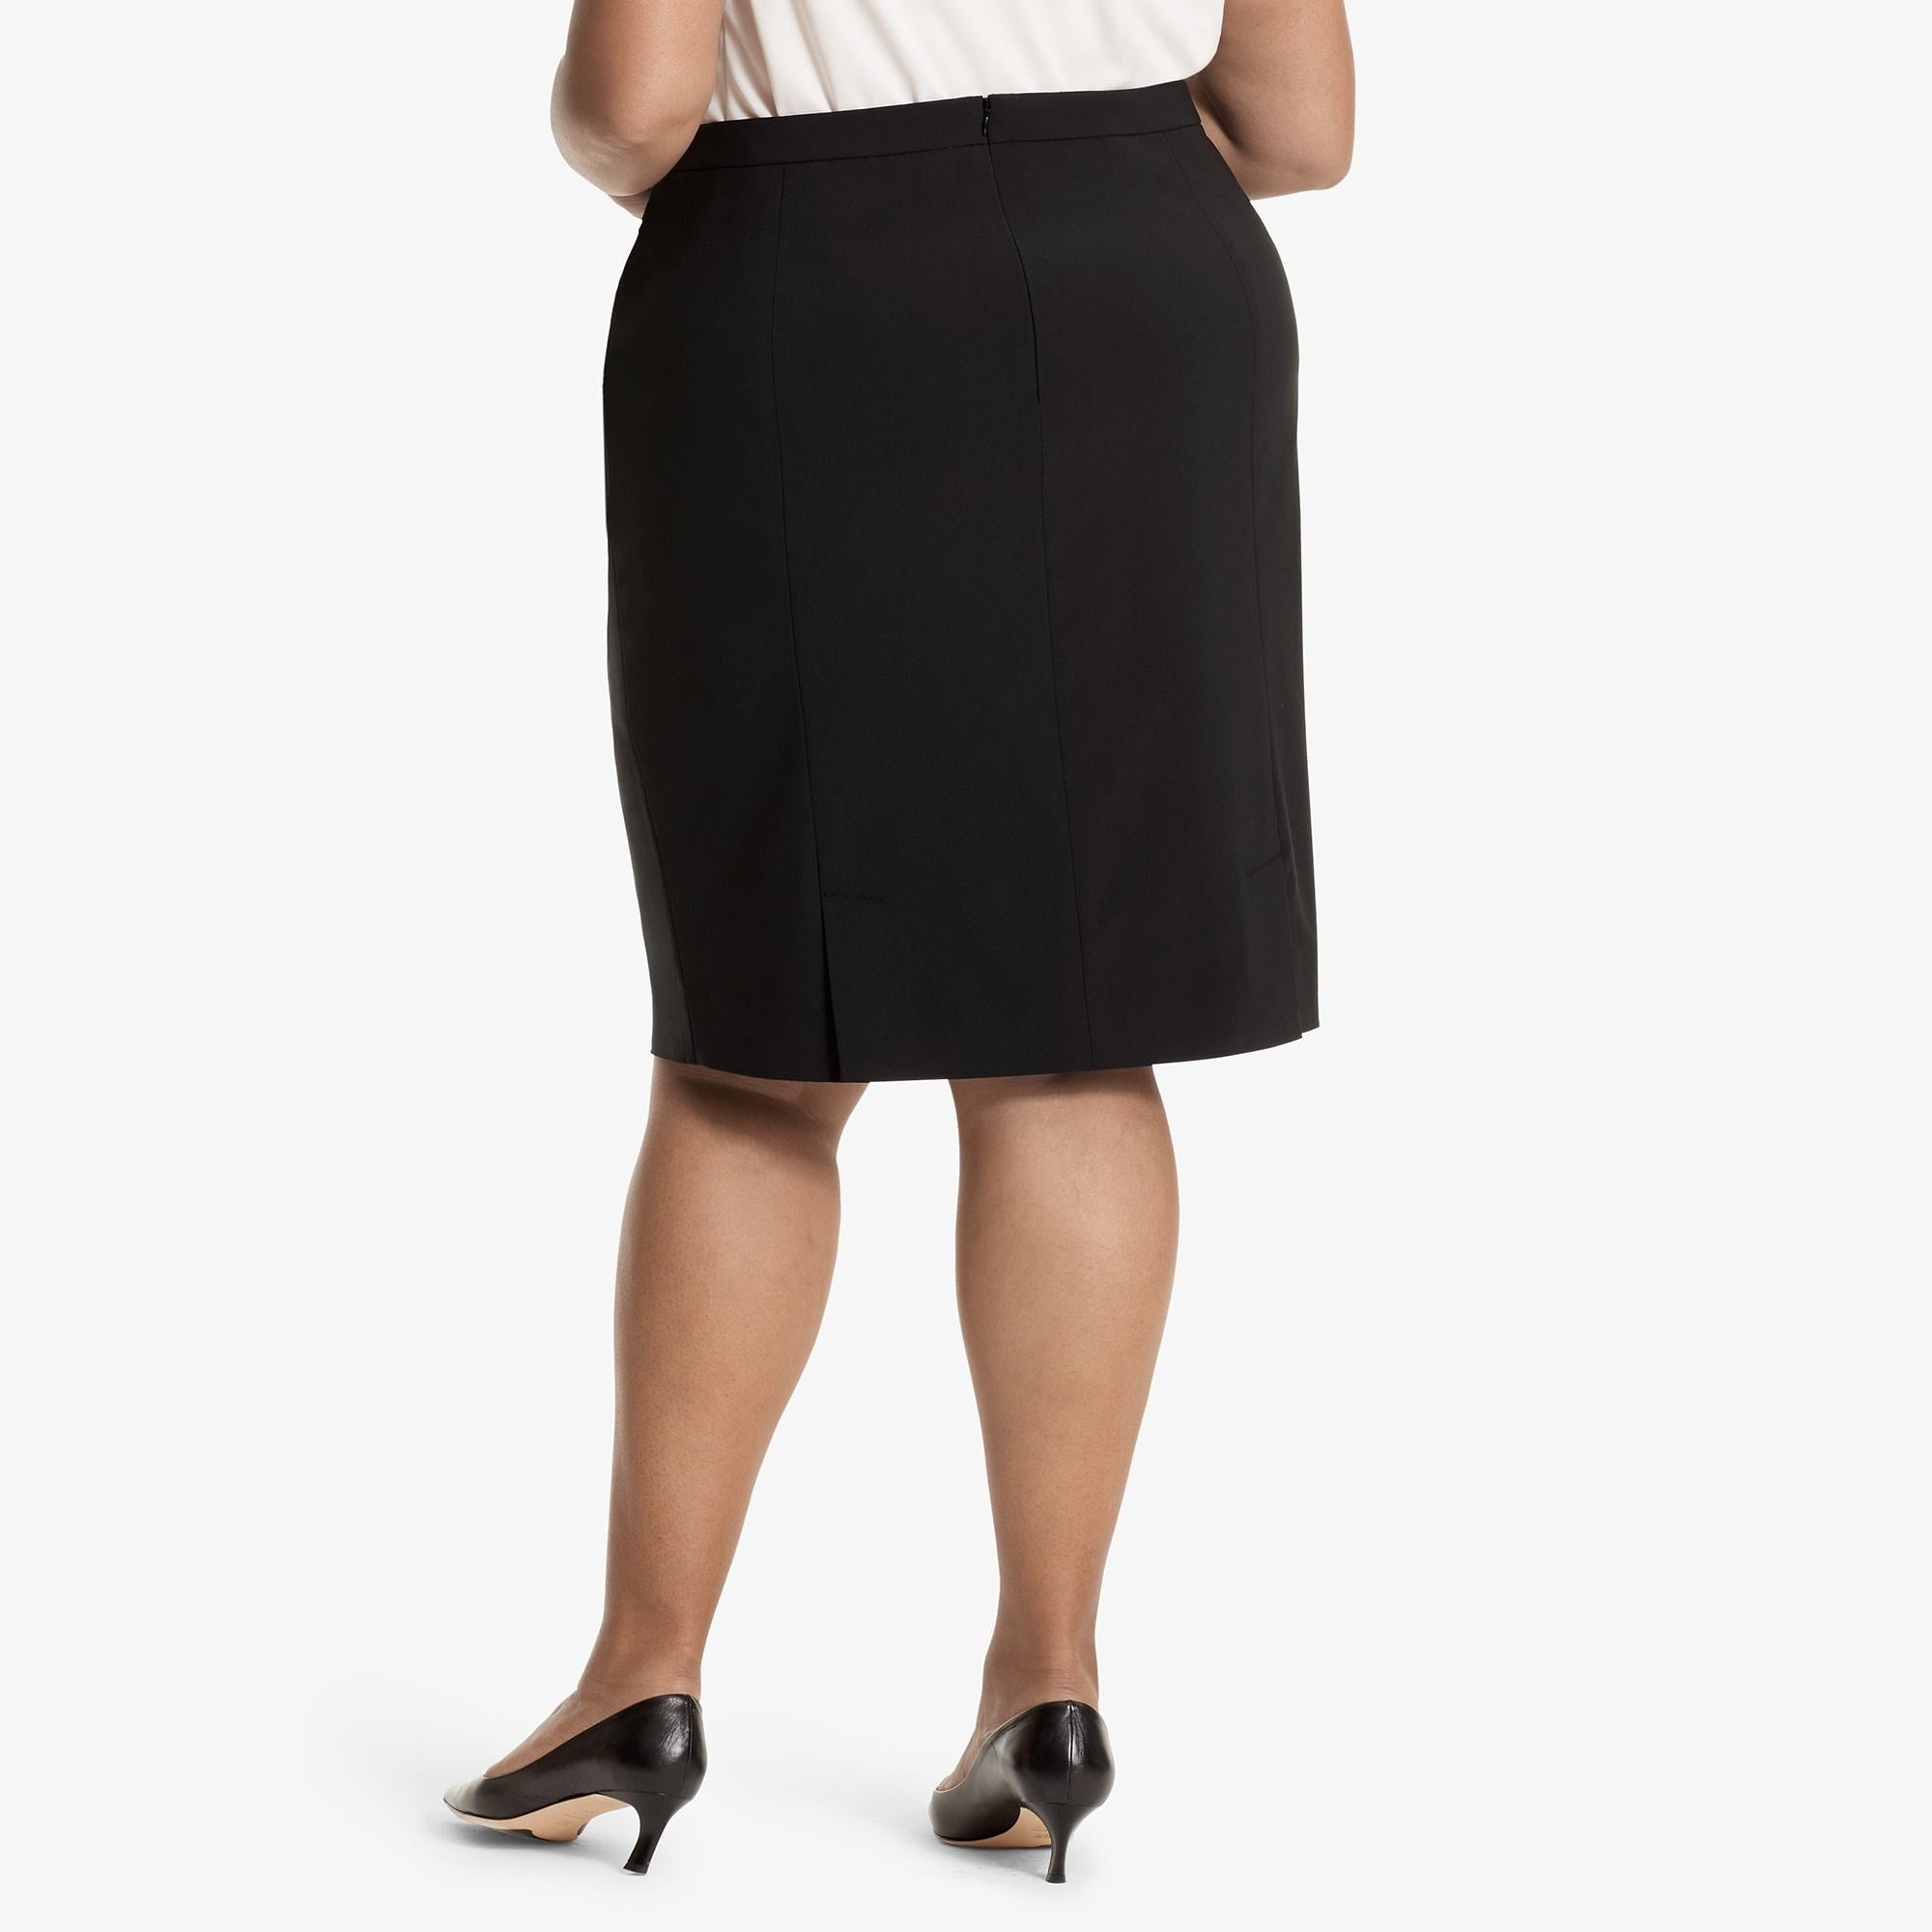 Back image of a woman standing wearing the Cobble hill skirt in Black